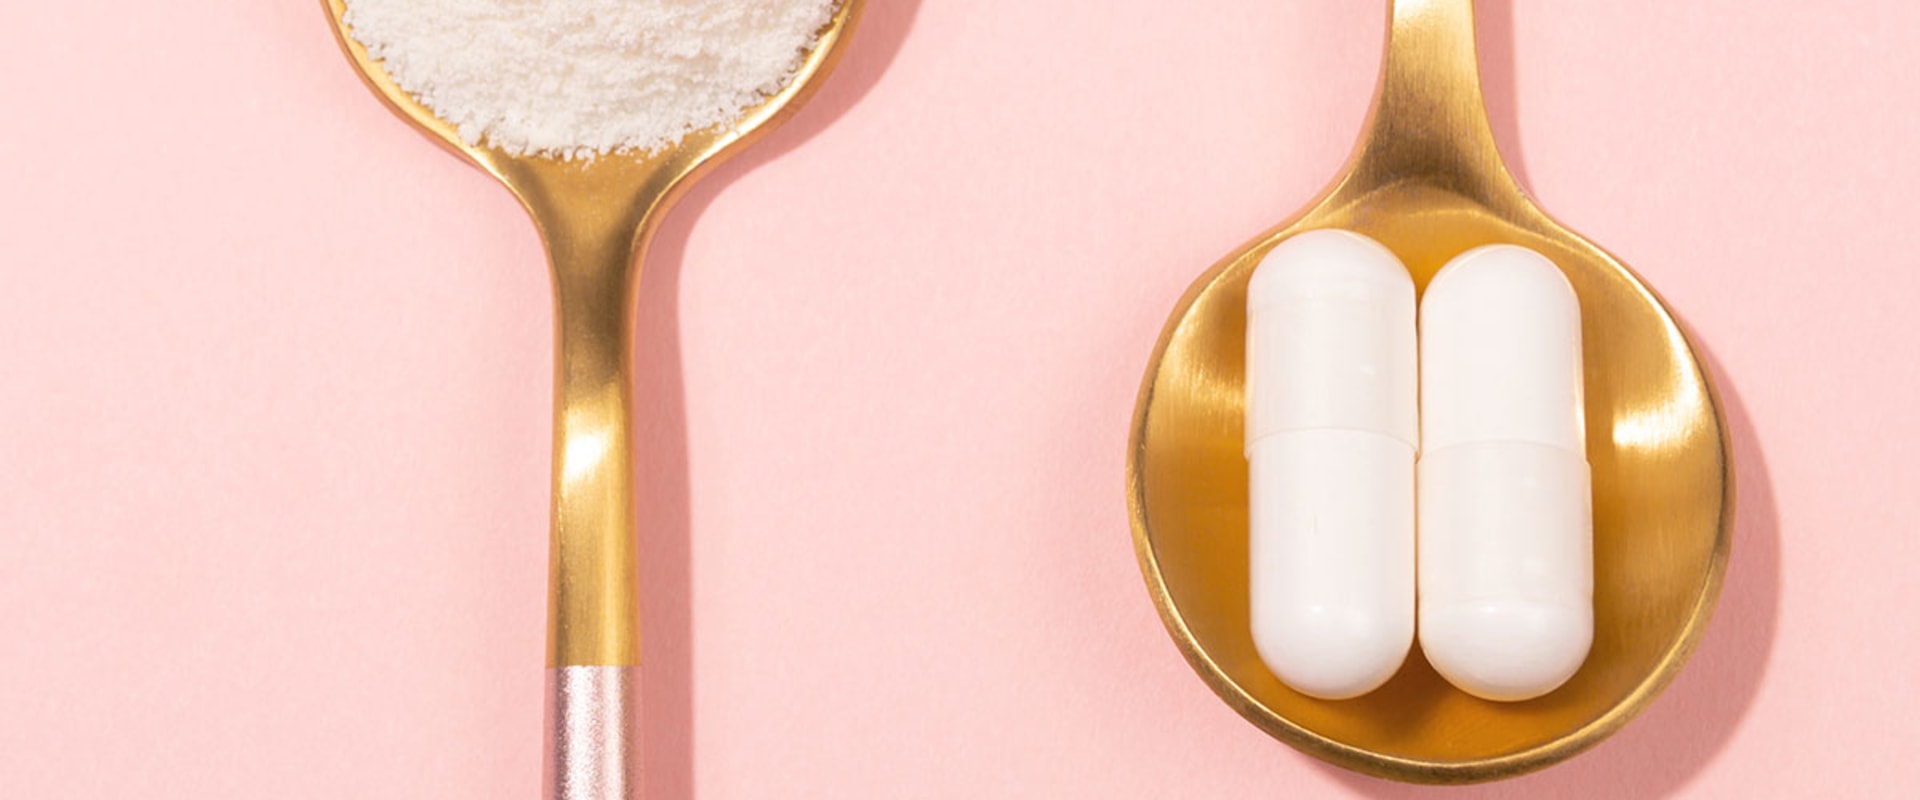 Do You Need to Take Collagen Supplements? An Expert's Guide